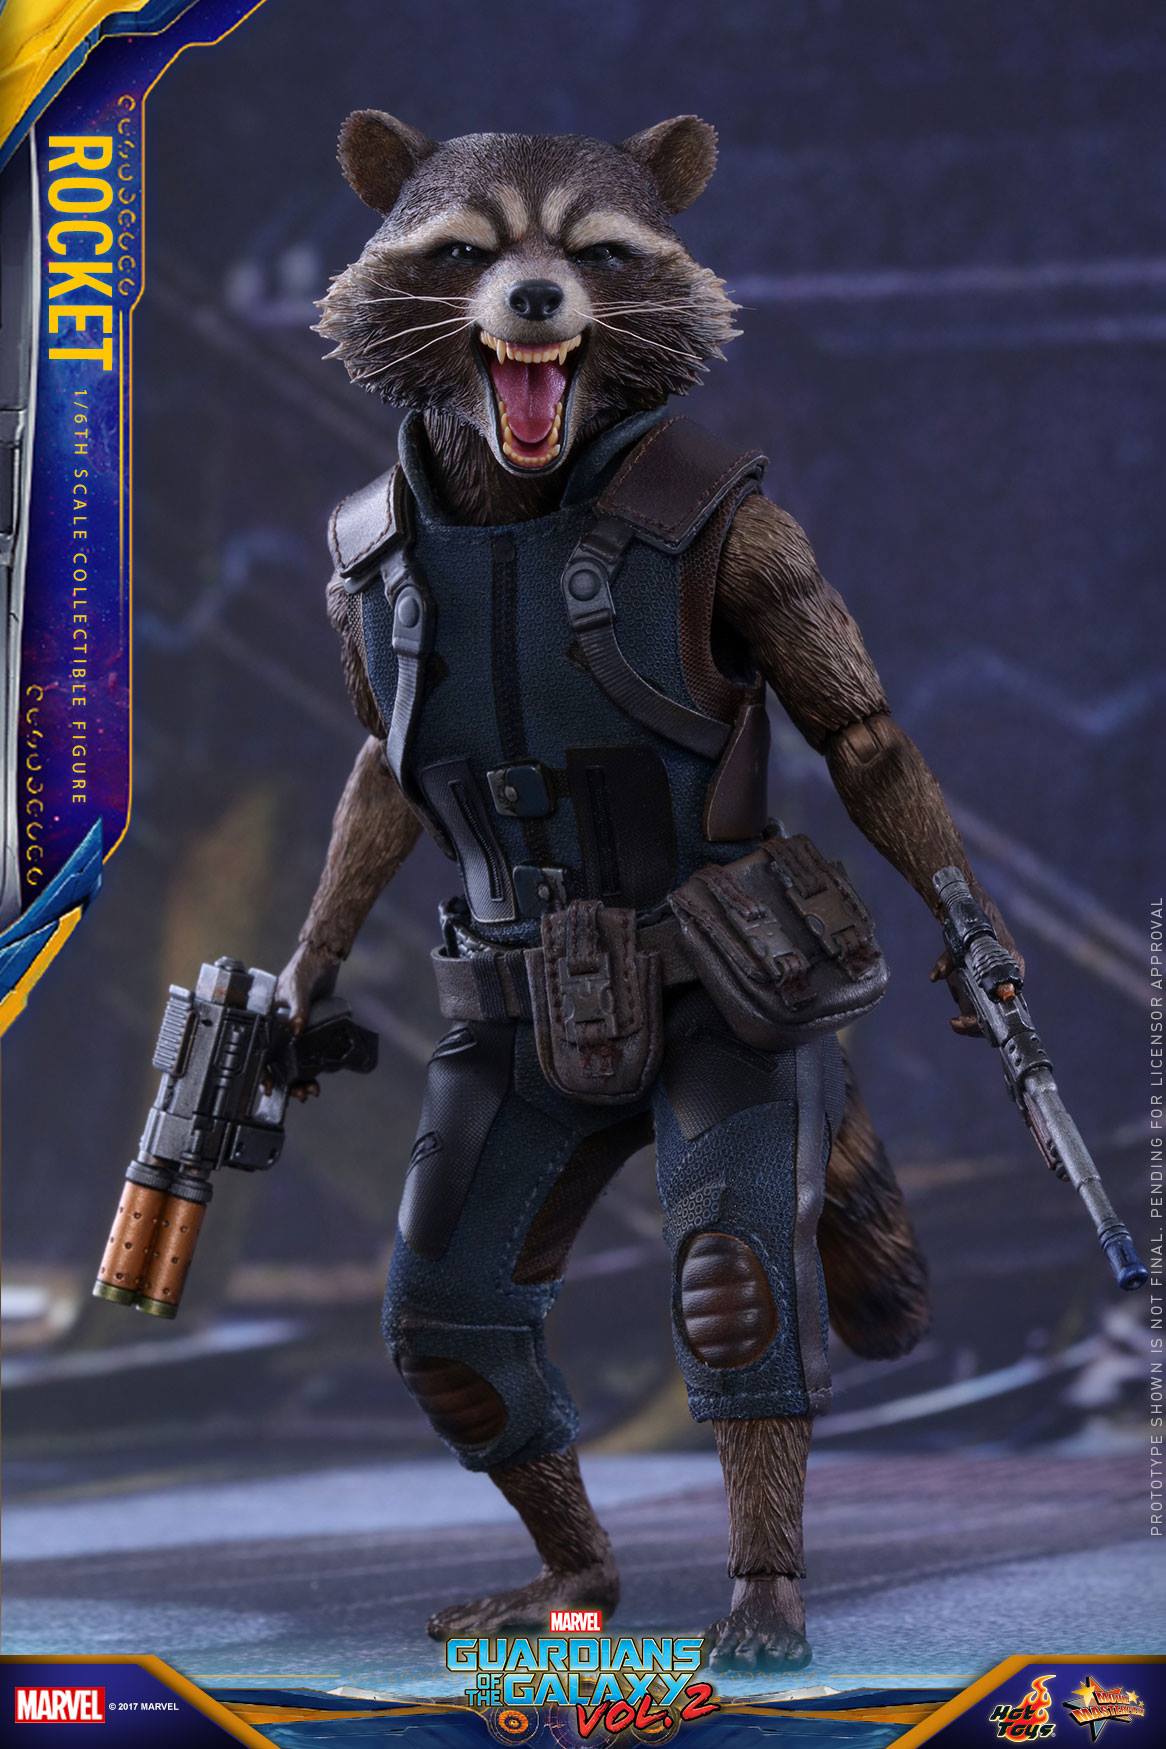 GOTG Vol. 2 - 1/6th scale Rocket Collectible Figure